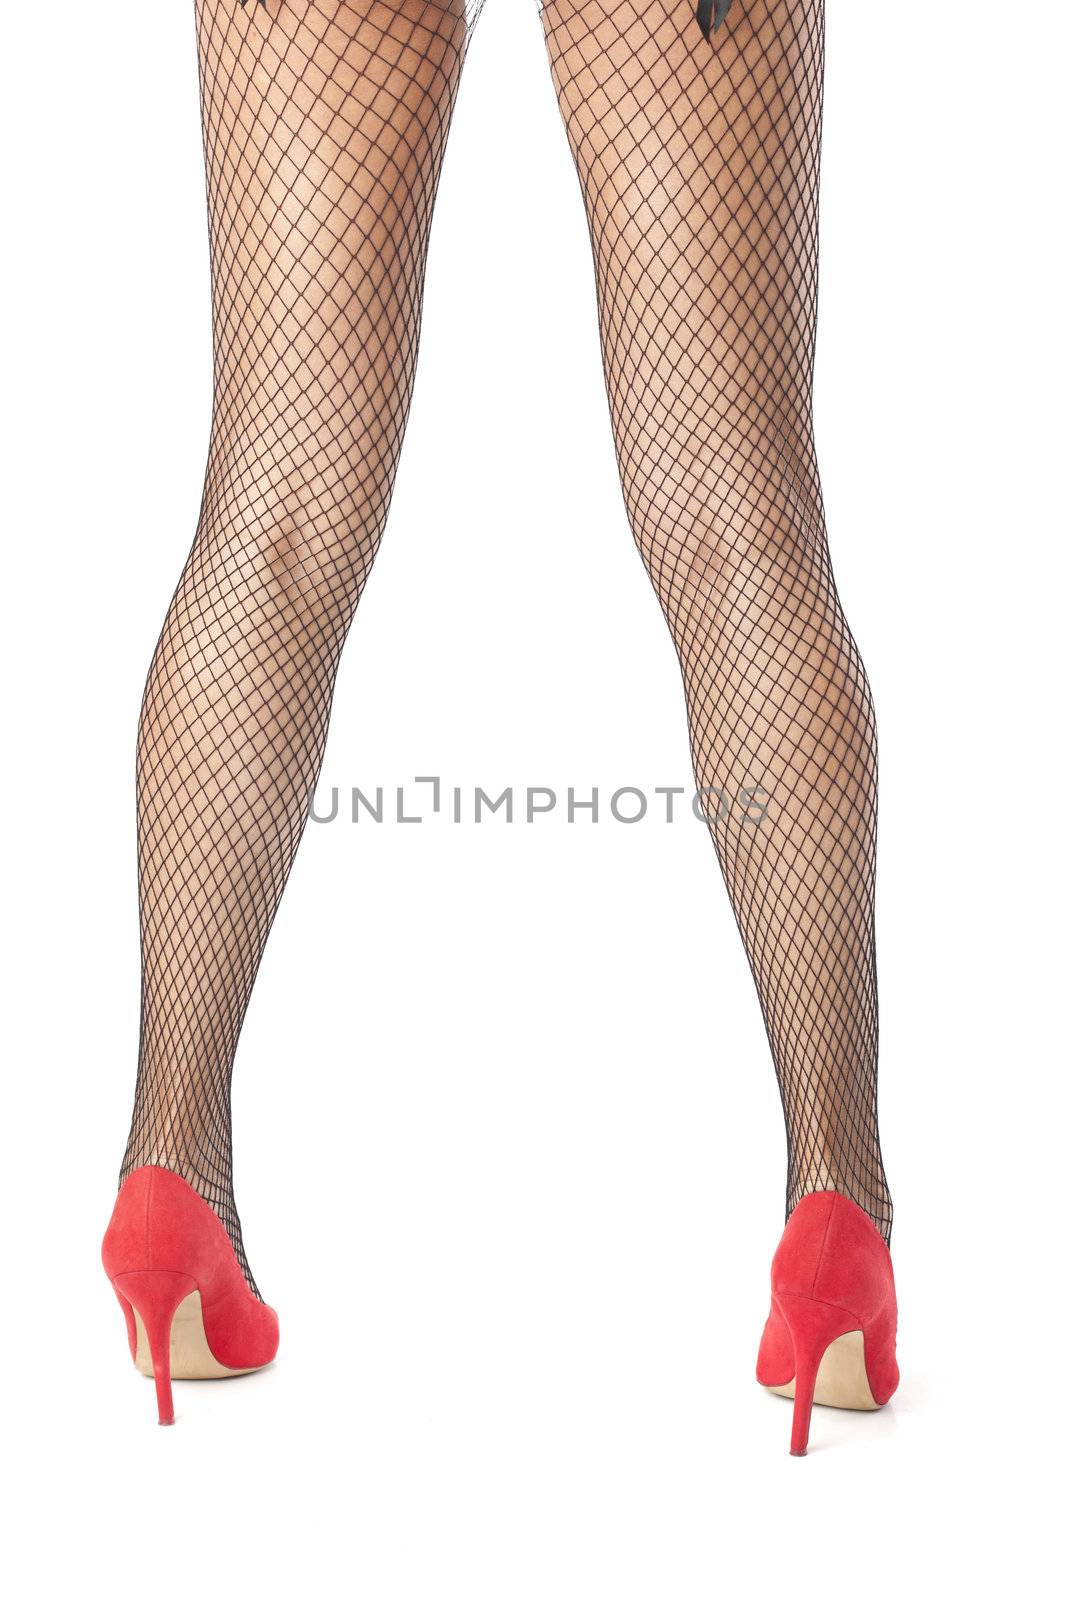 Sexy legs in fishnet stocking by adamr